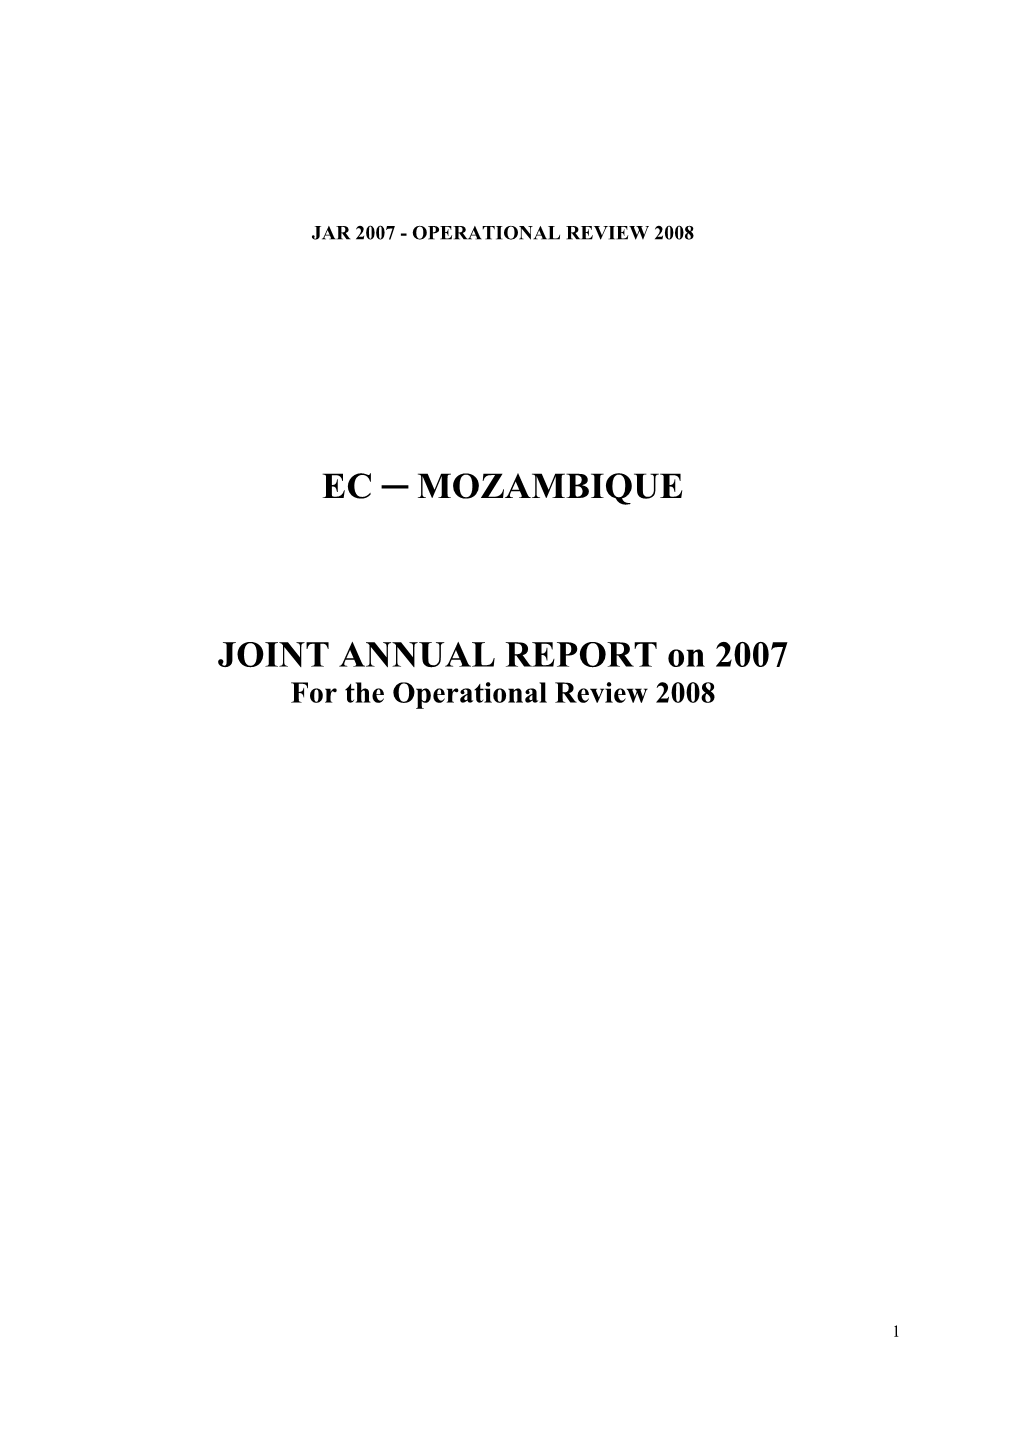 EC MOZAMBIQUE JOINT ANNUAL REPORT on 2007